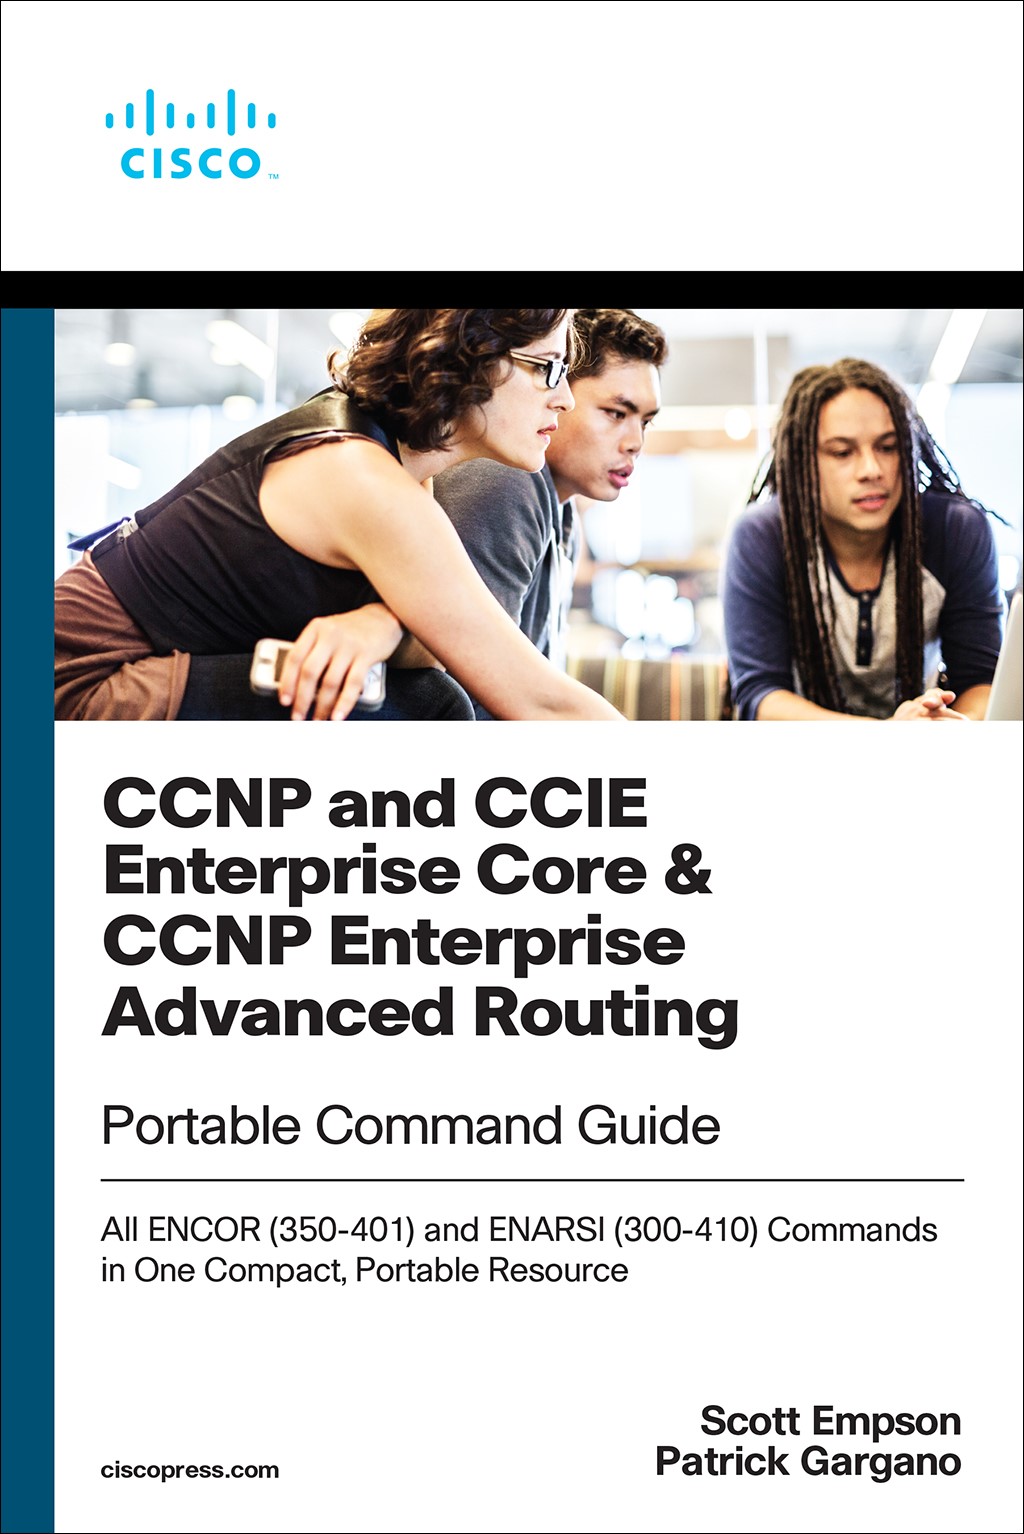 CCNP and CCIE Enterprise Core &amp; CCNP Enterprise Advanced Routing Portable Command Guide: All ENCOR (350-401) and ENARSI (300-410) Commands in One Compact, Portable Resource